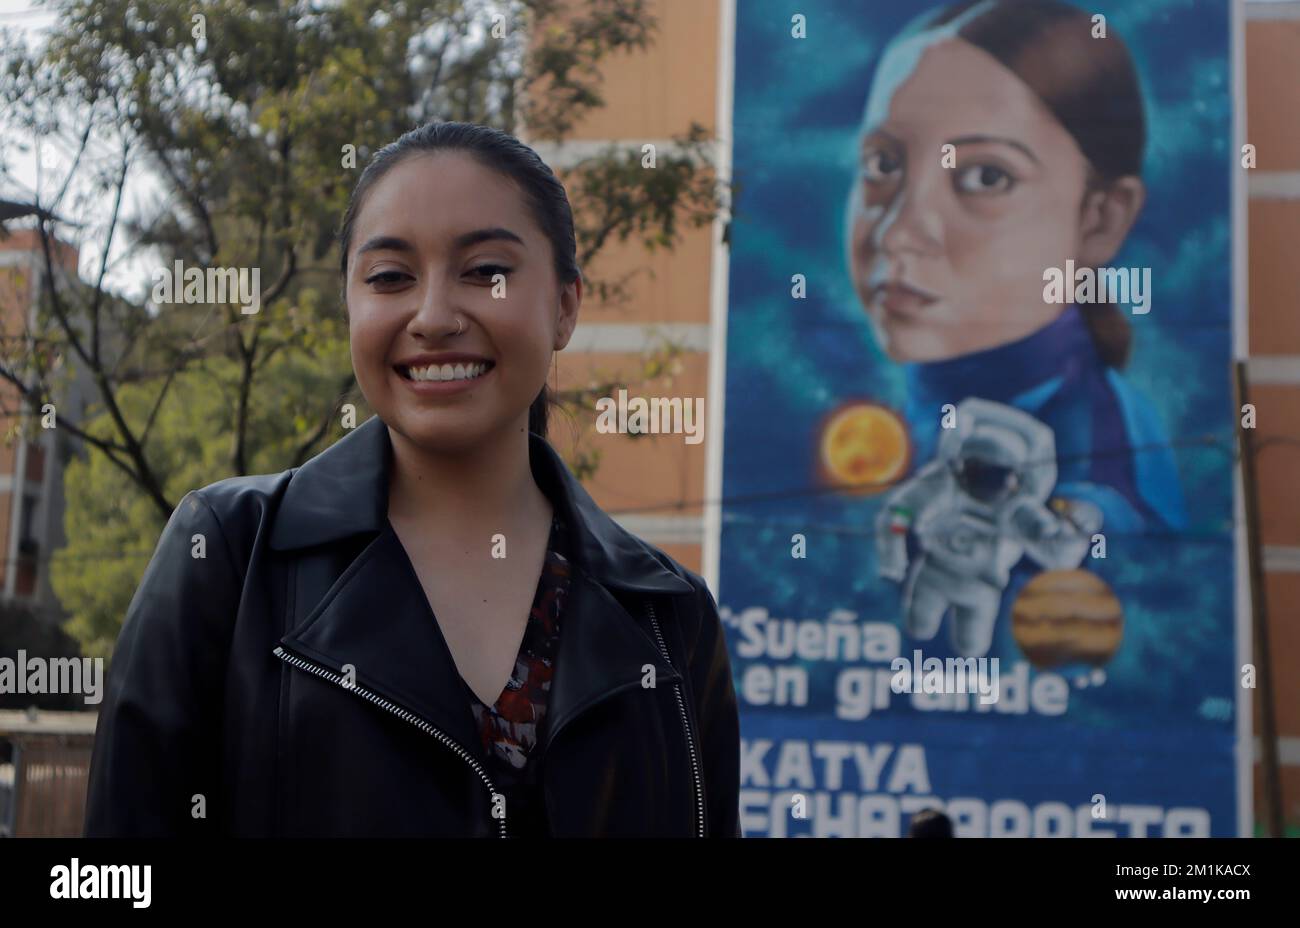 Mexico City, Mexico. 12th Dec, 2022. Katya Echazarreta, the first Mexican woman to travel to space in June 2022 on the Blue Origin NS-21 mission aboard NASA's New Shepard spacecraft, during the unveiling of a mural in her honour located on the facade of a building in front of the Utopia Barco in Iztapalapa, Mexico City. (Photo by Gerardo Vieyra/NurPhoto)0 Credit: NurPhoto/Alamy Live News Stock Photo